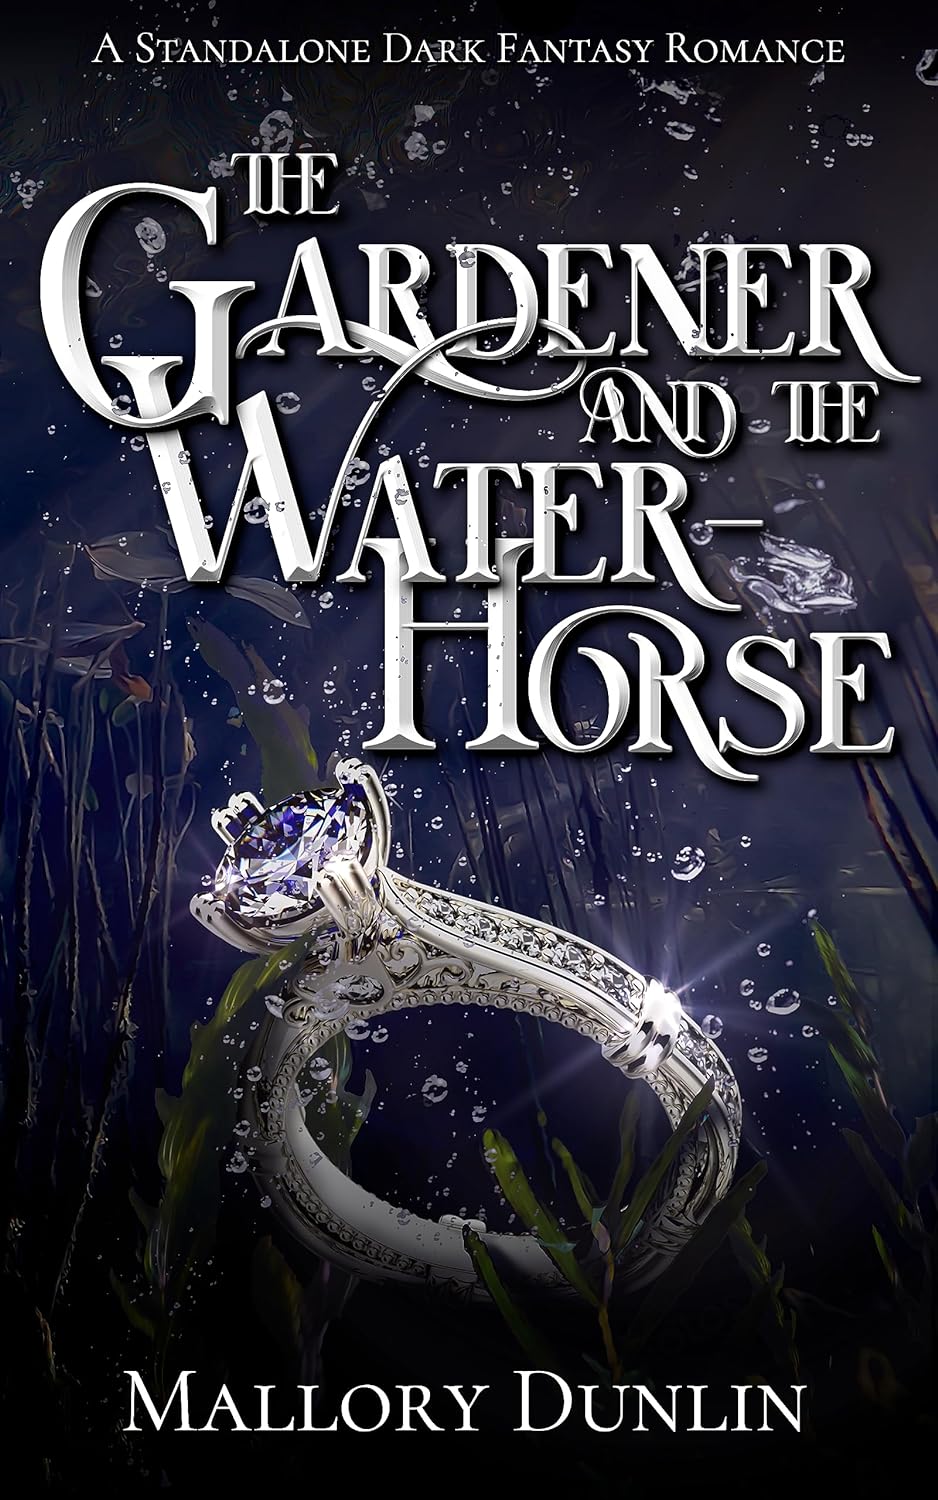 The Gardener and the water horse